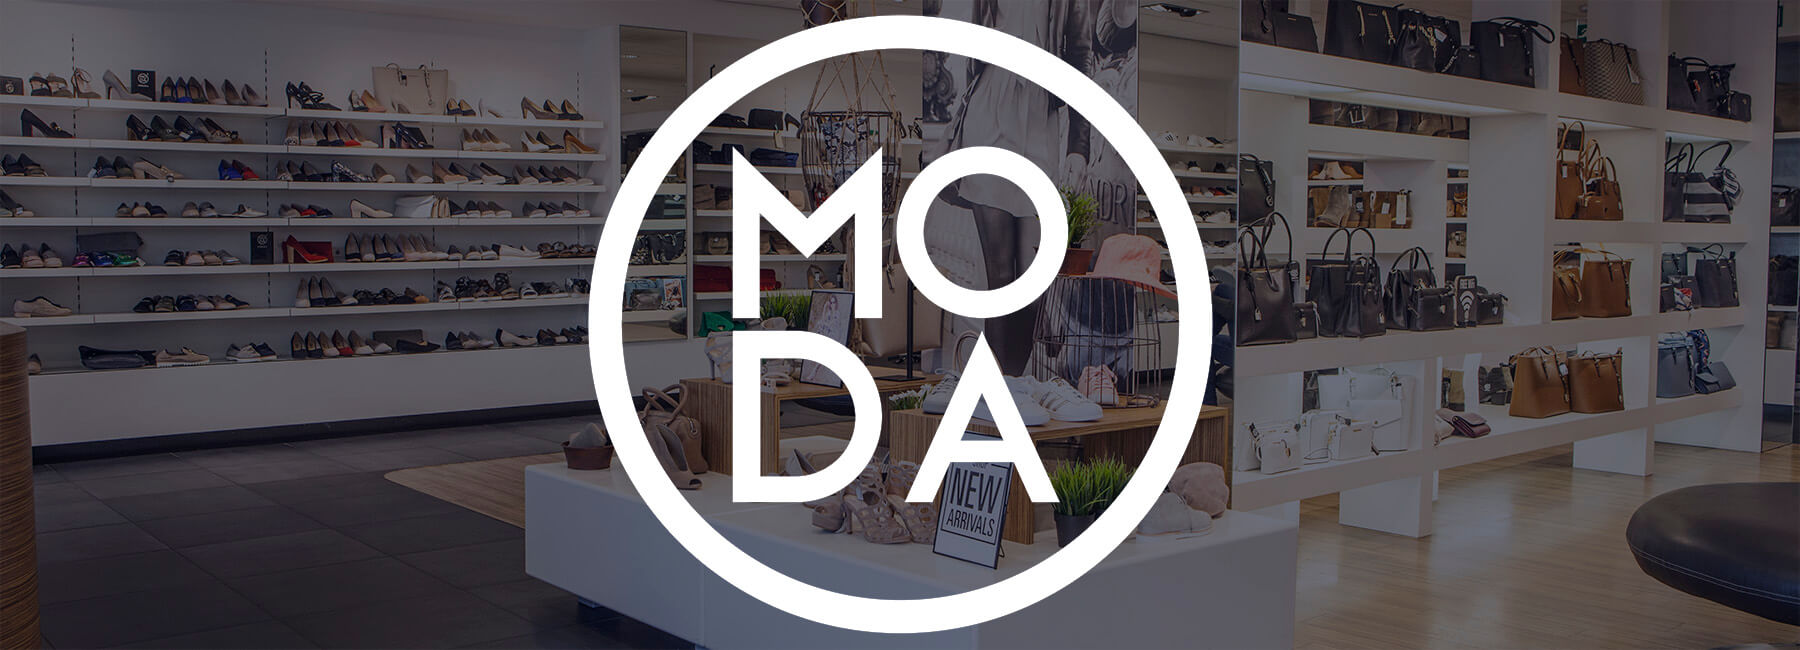 Omoda wants more out of feedback and appoints Mopinion as its partner